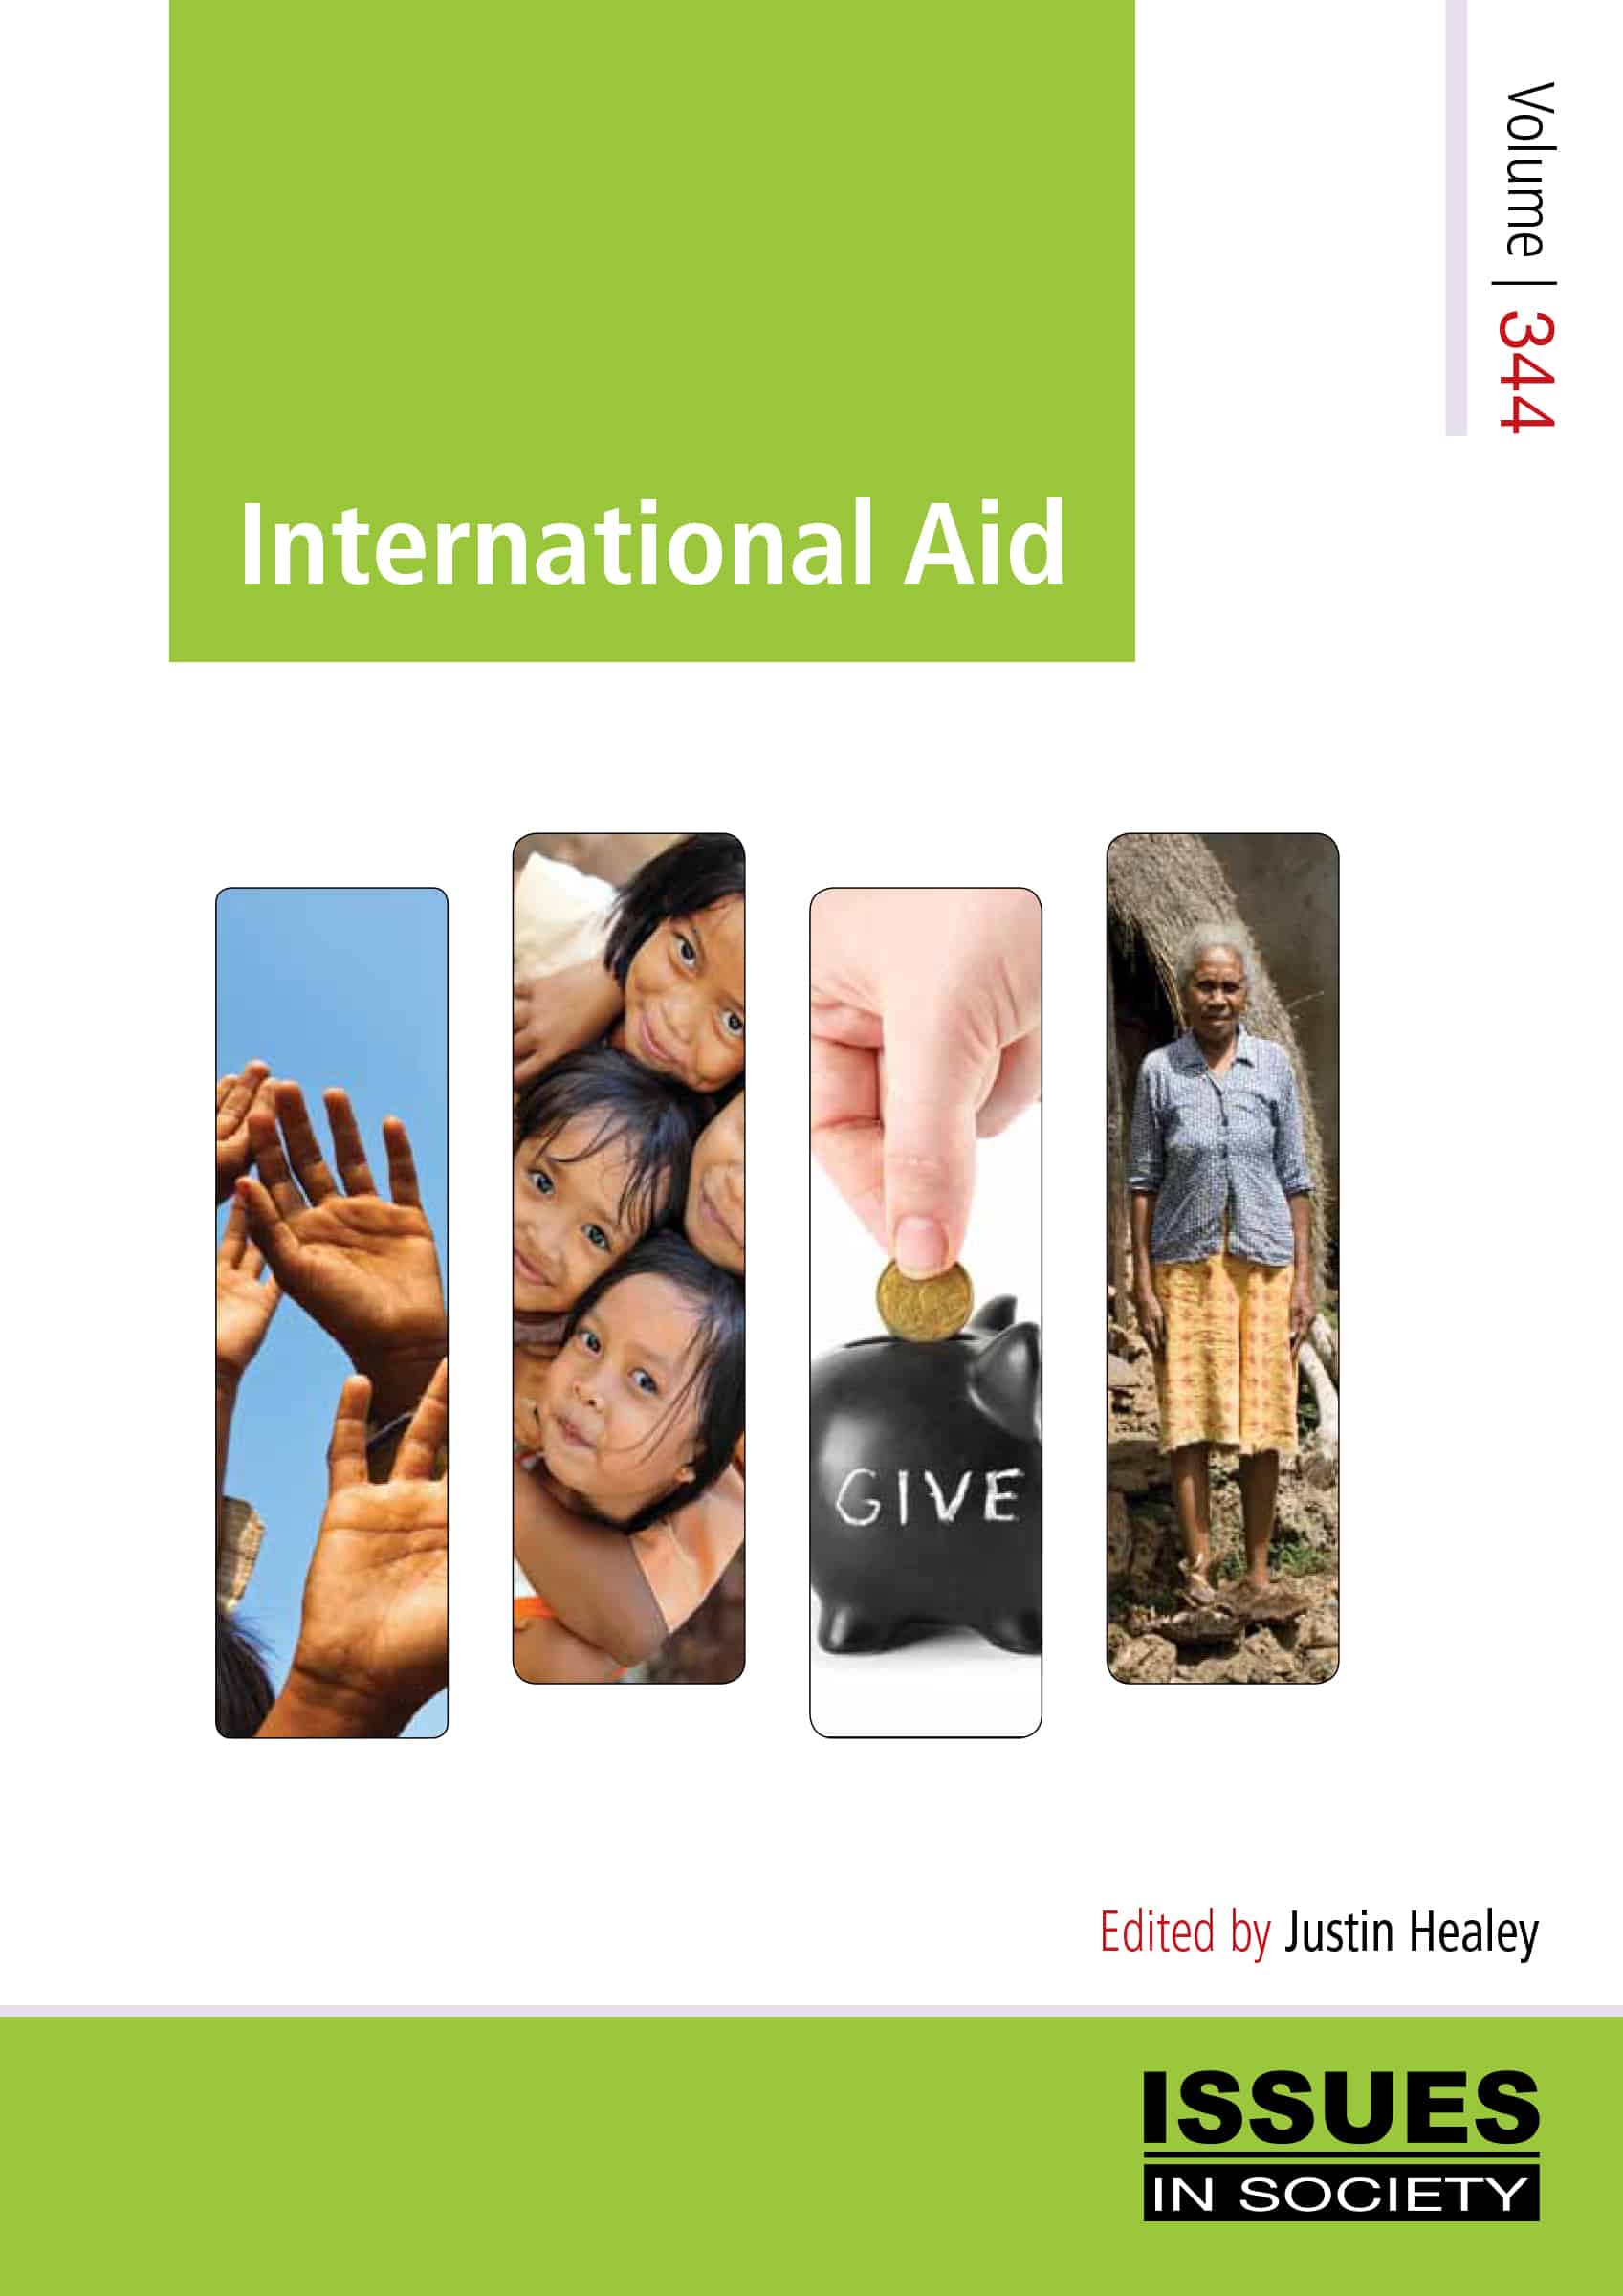 research on international aid